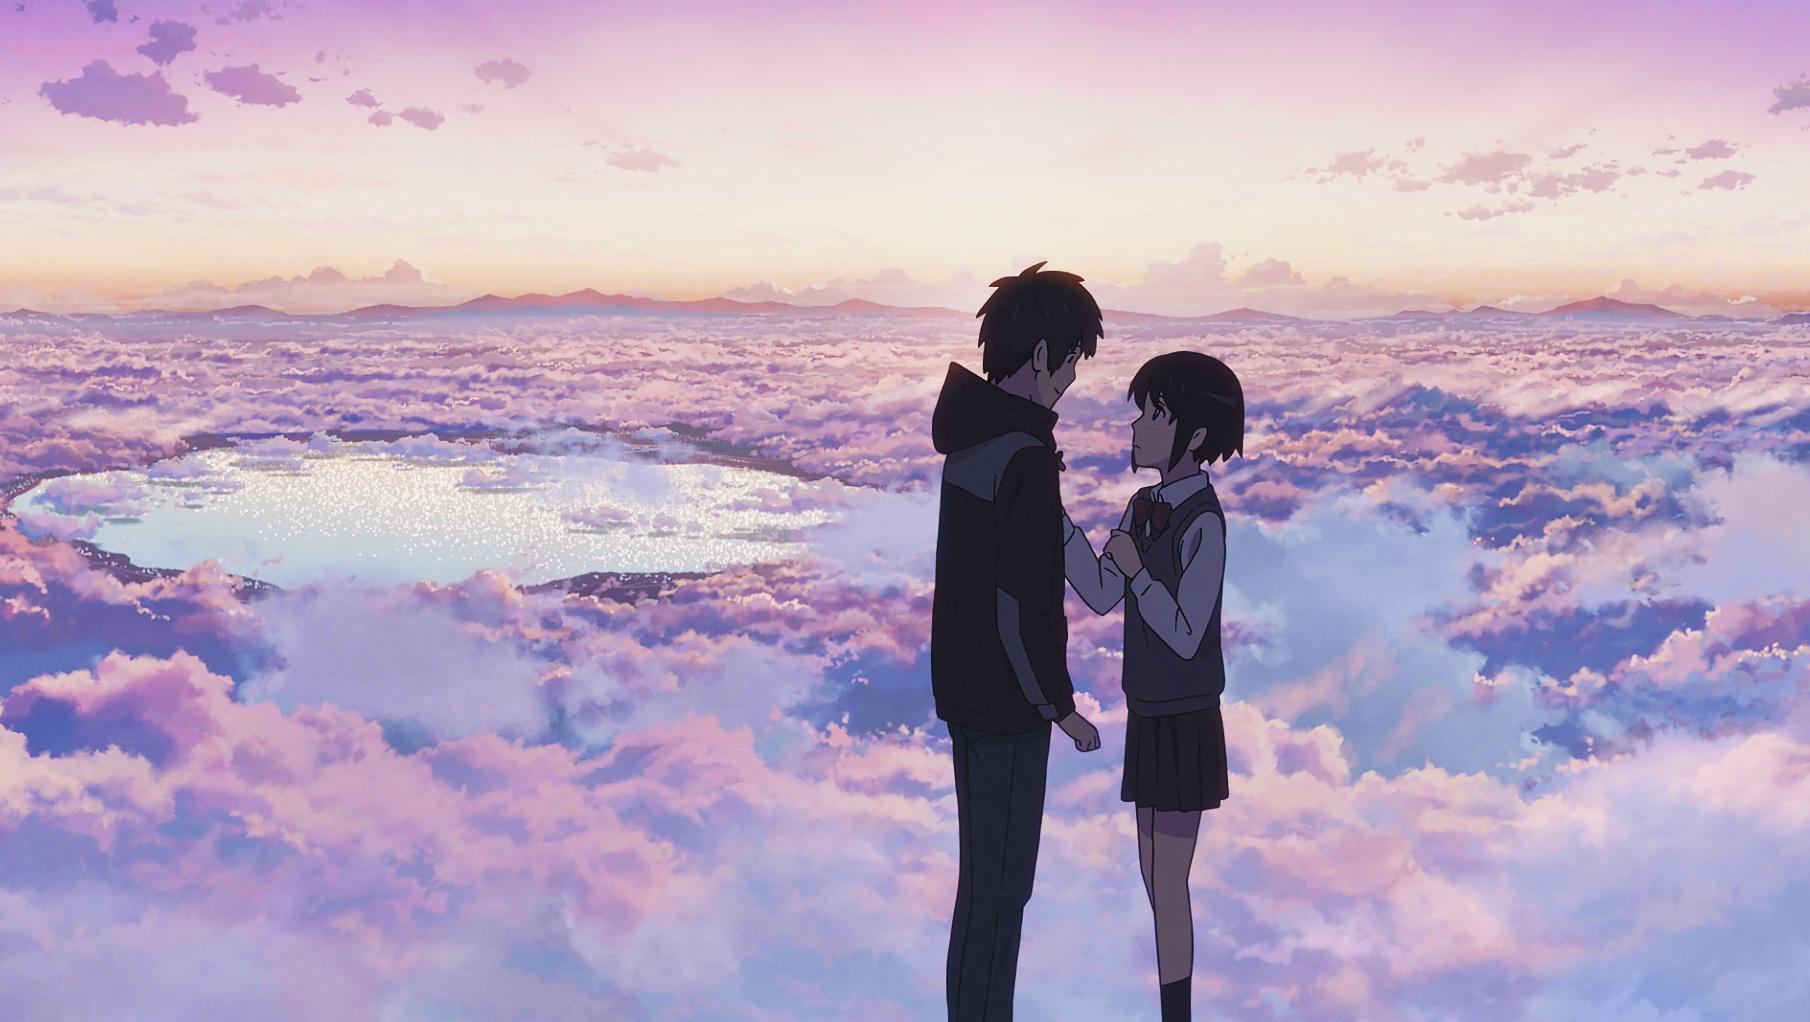 your name characters in clouds